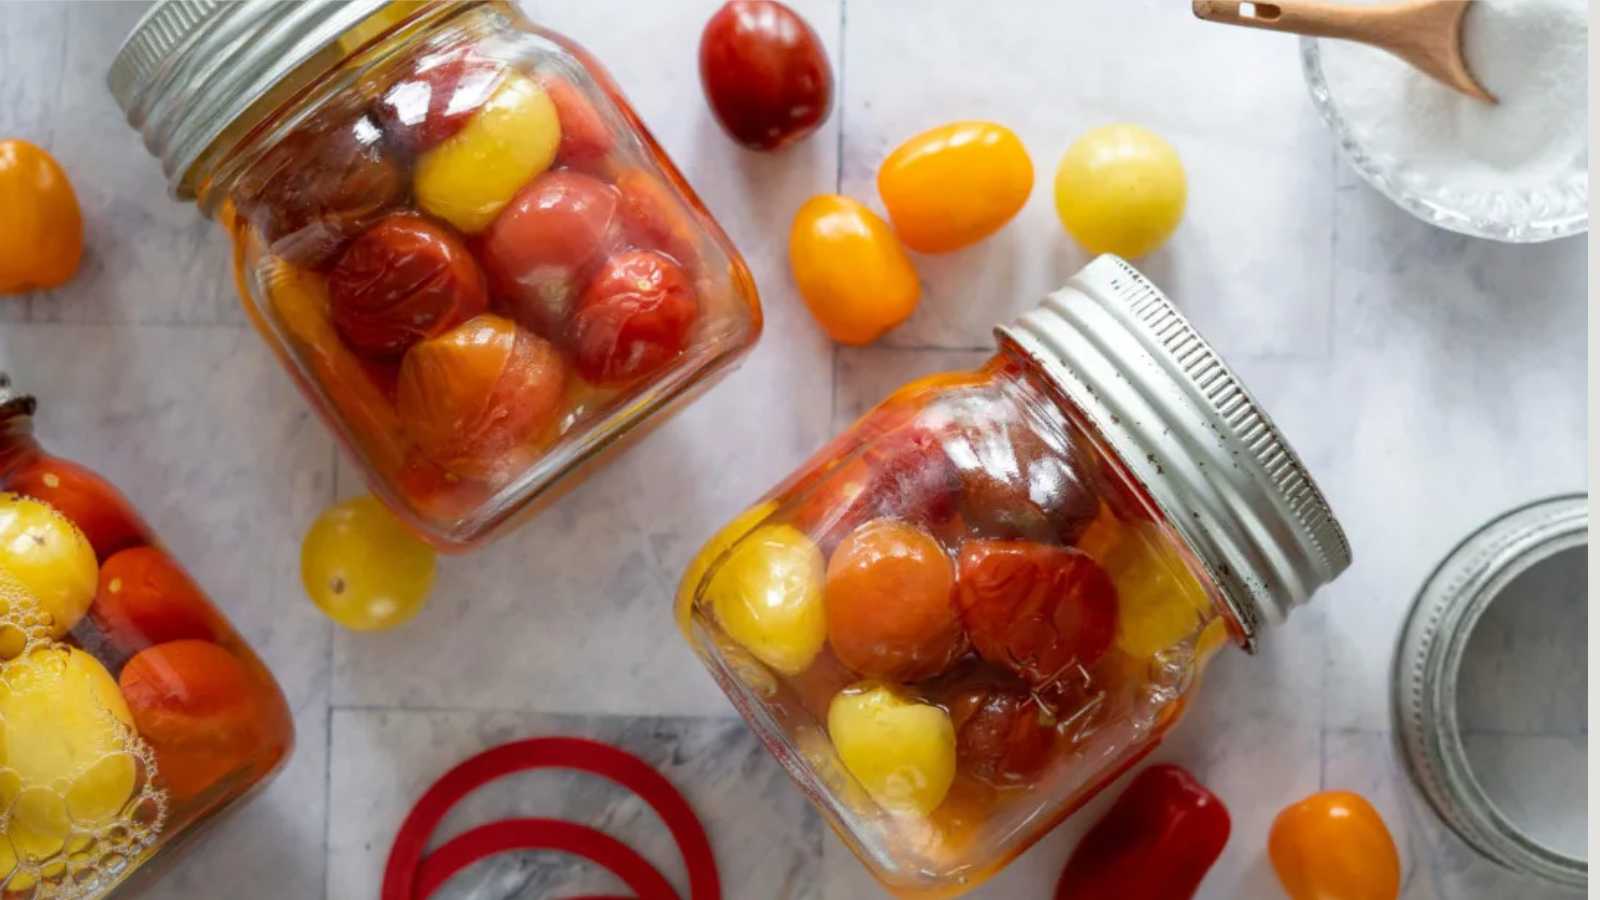 A jar of cherry tomatoes with raw tomatoes and salt beside.